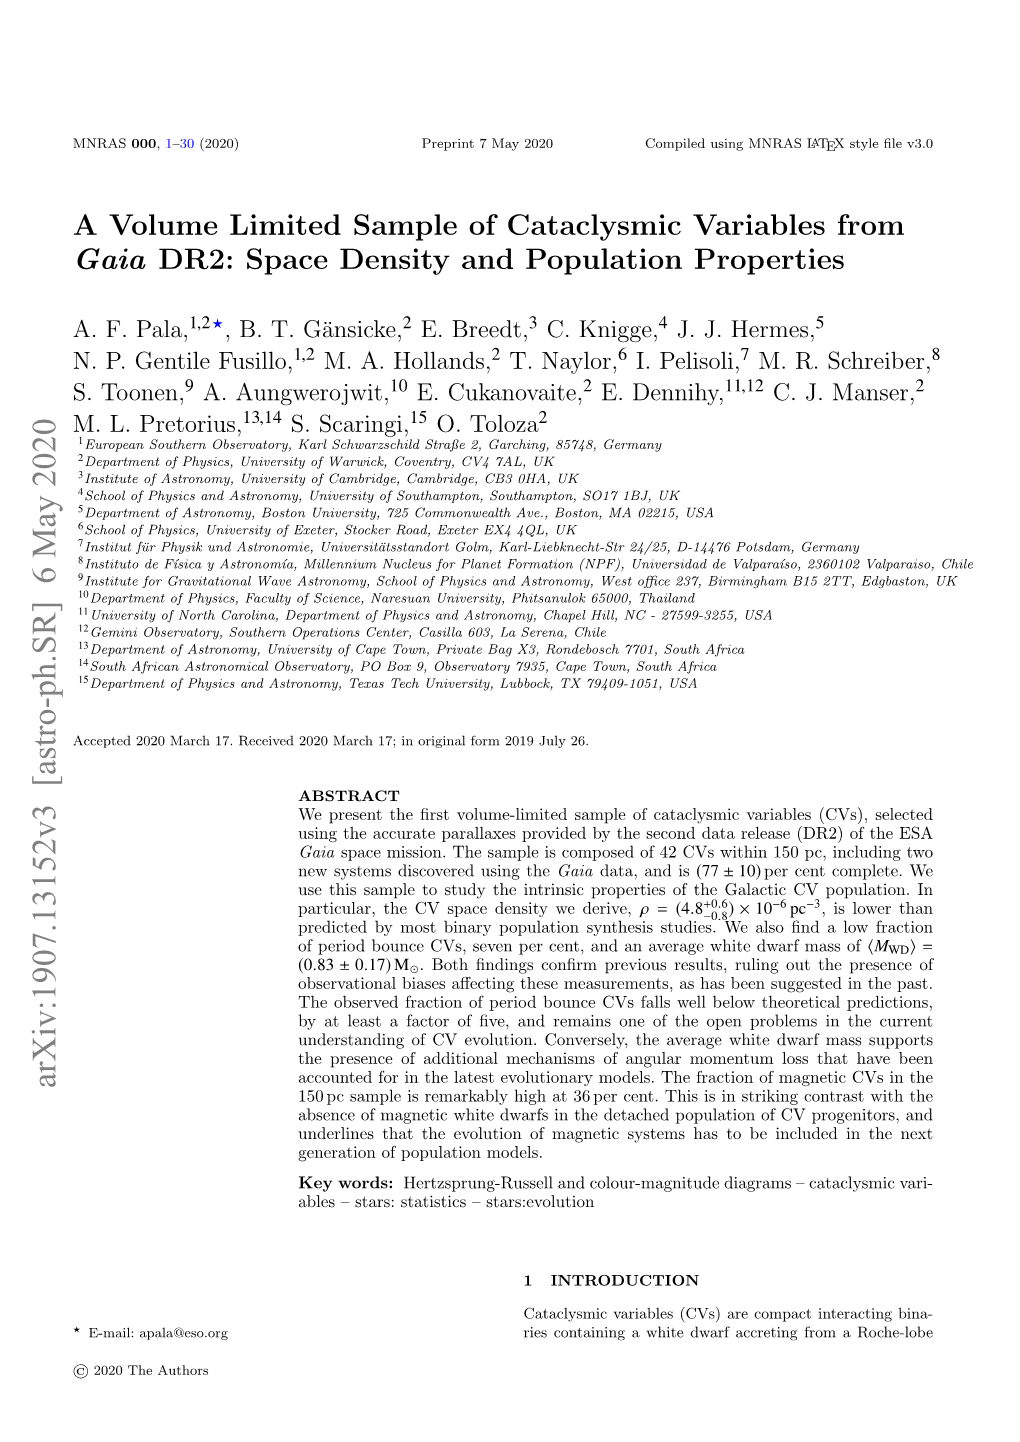 A Volume Limited Sample of Cataclysmic Variables from Gaia DR2: Space Density and Population Properties